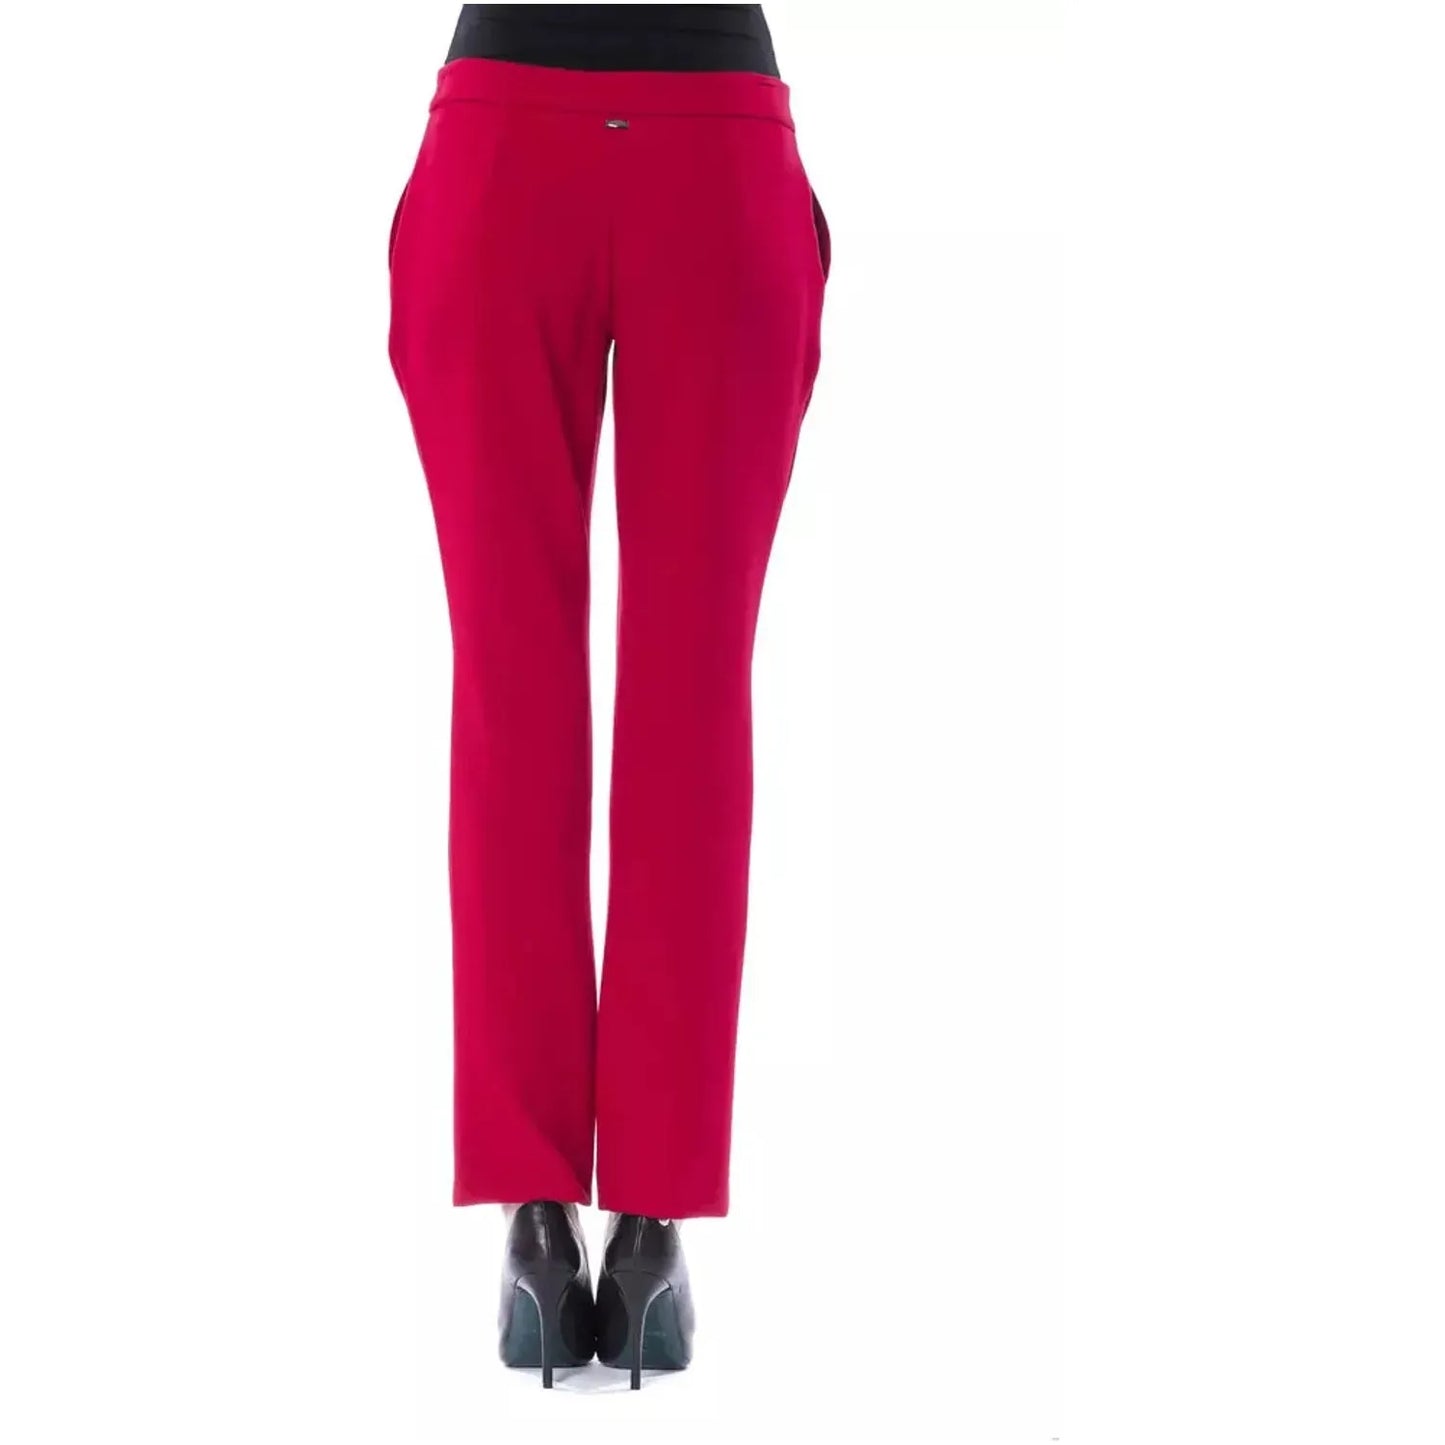 BYBLOS Chic Fuchsia Slim Fit Trousers ciliegia-jeans-pant